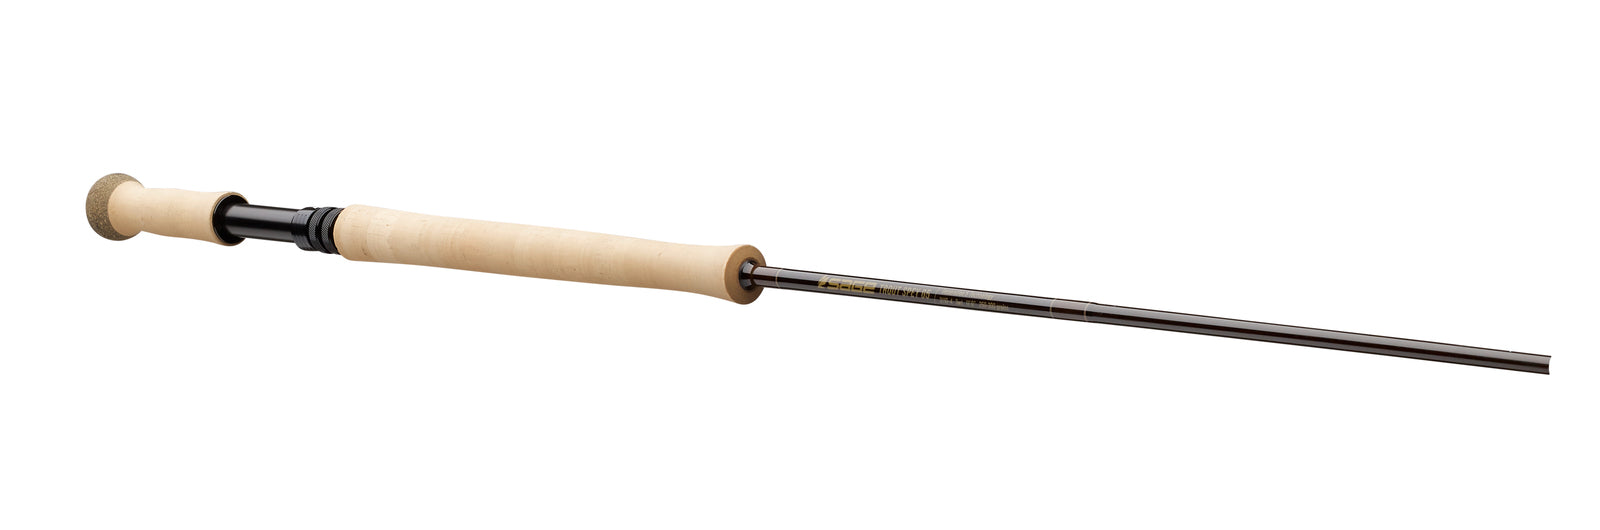 Sage X Spey Rods - Sage Fly Fishing - The Fly Shop